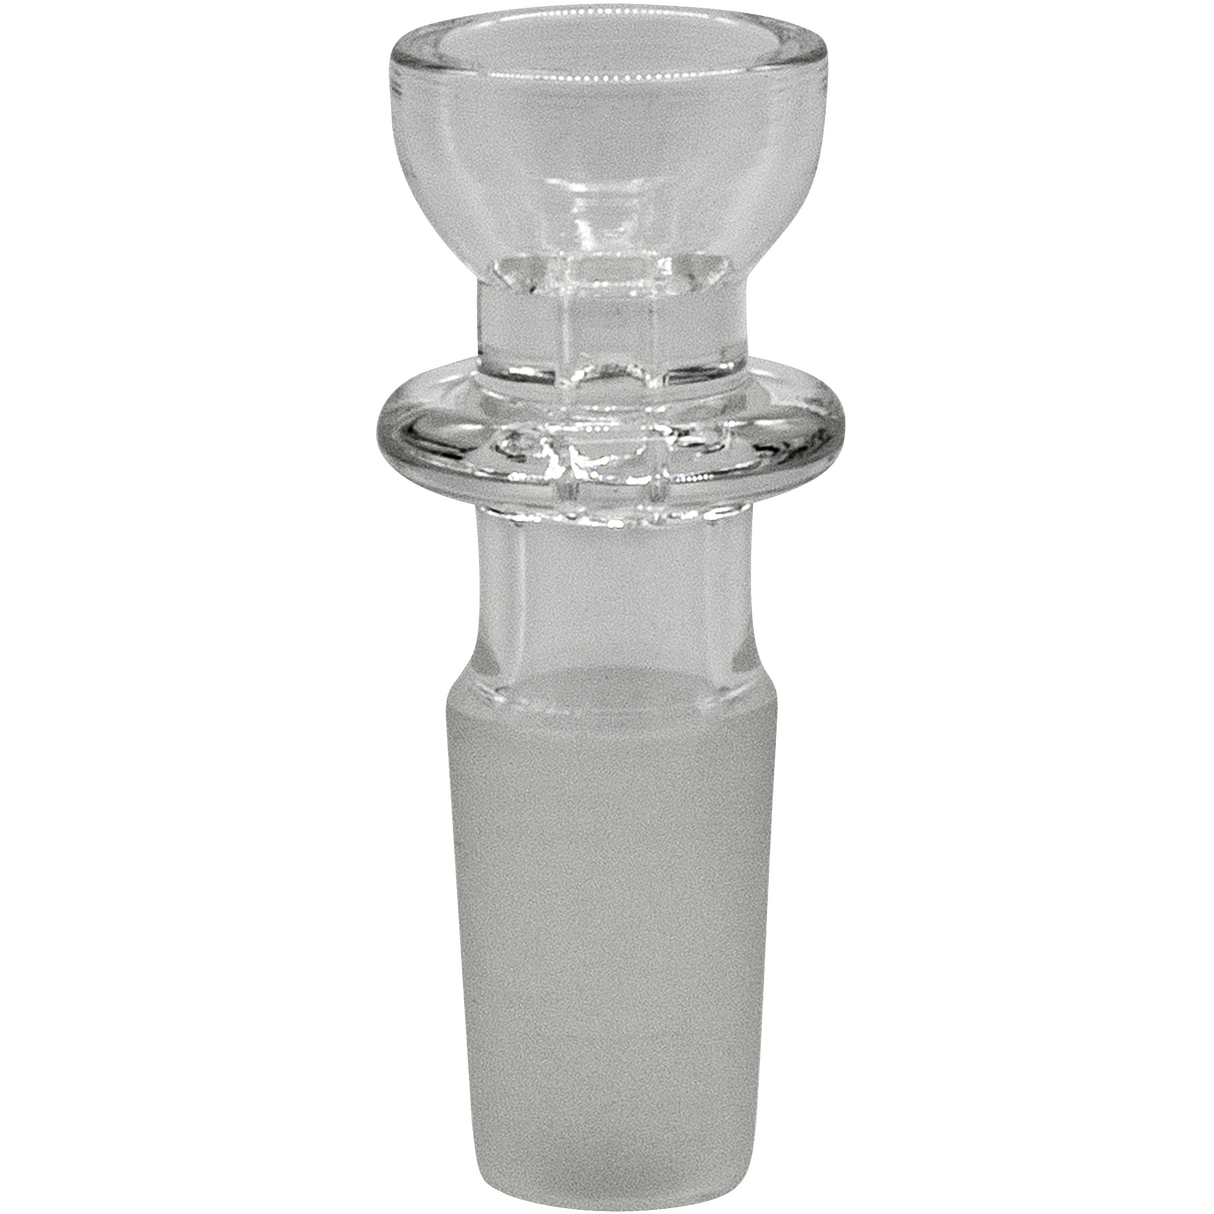 Rupert's Drop Snapper Bong Bowl with frosted glass and clear ring handle for easy grip